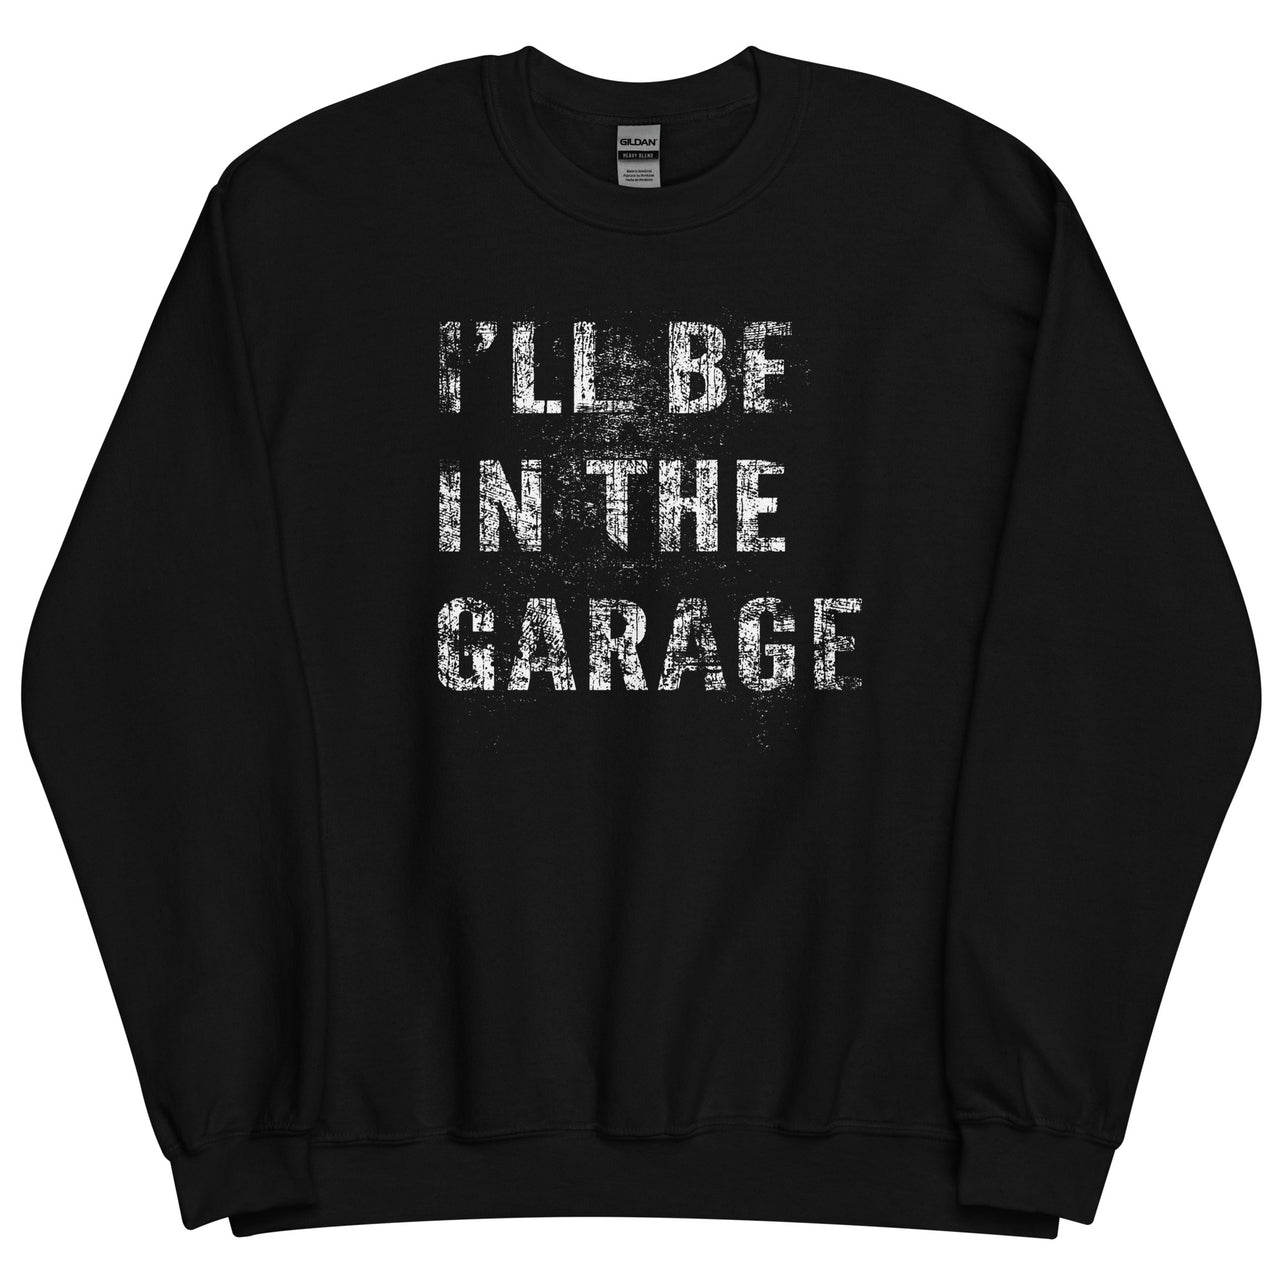 I'll Be In The Garage, Mechanic Sweatshirt , Car Enthusiast Crew Neck Pullover in black